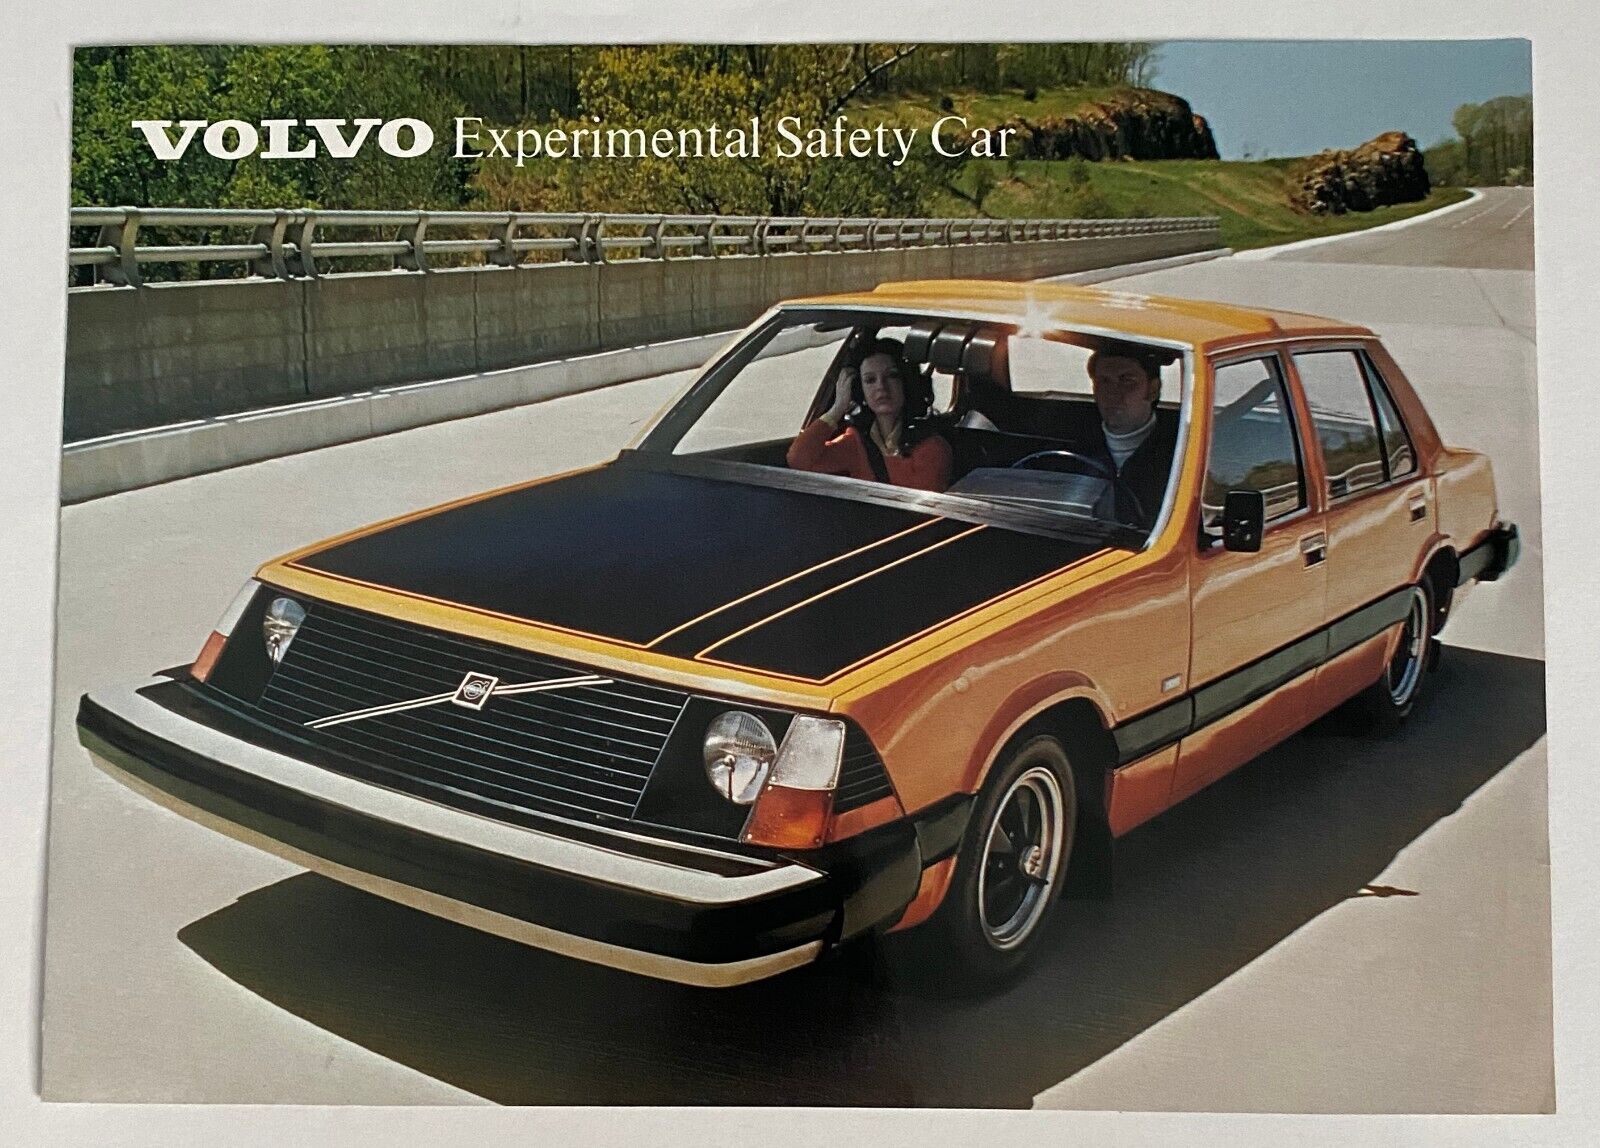 1972 Volvo Experimental Safety Car Brochure 8 X 11 Trifold